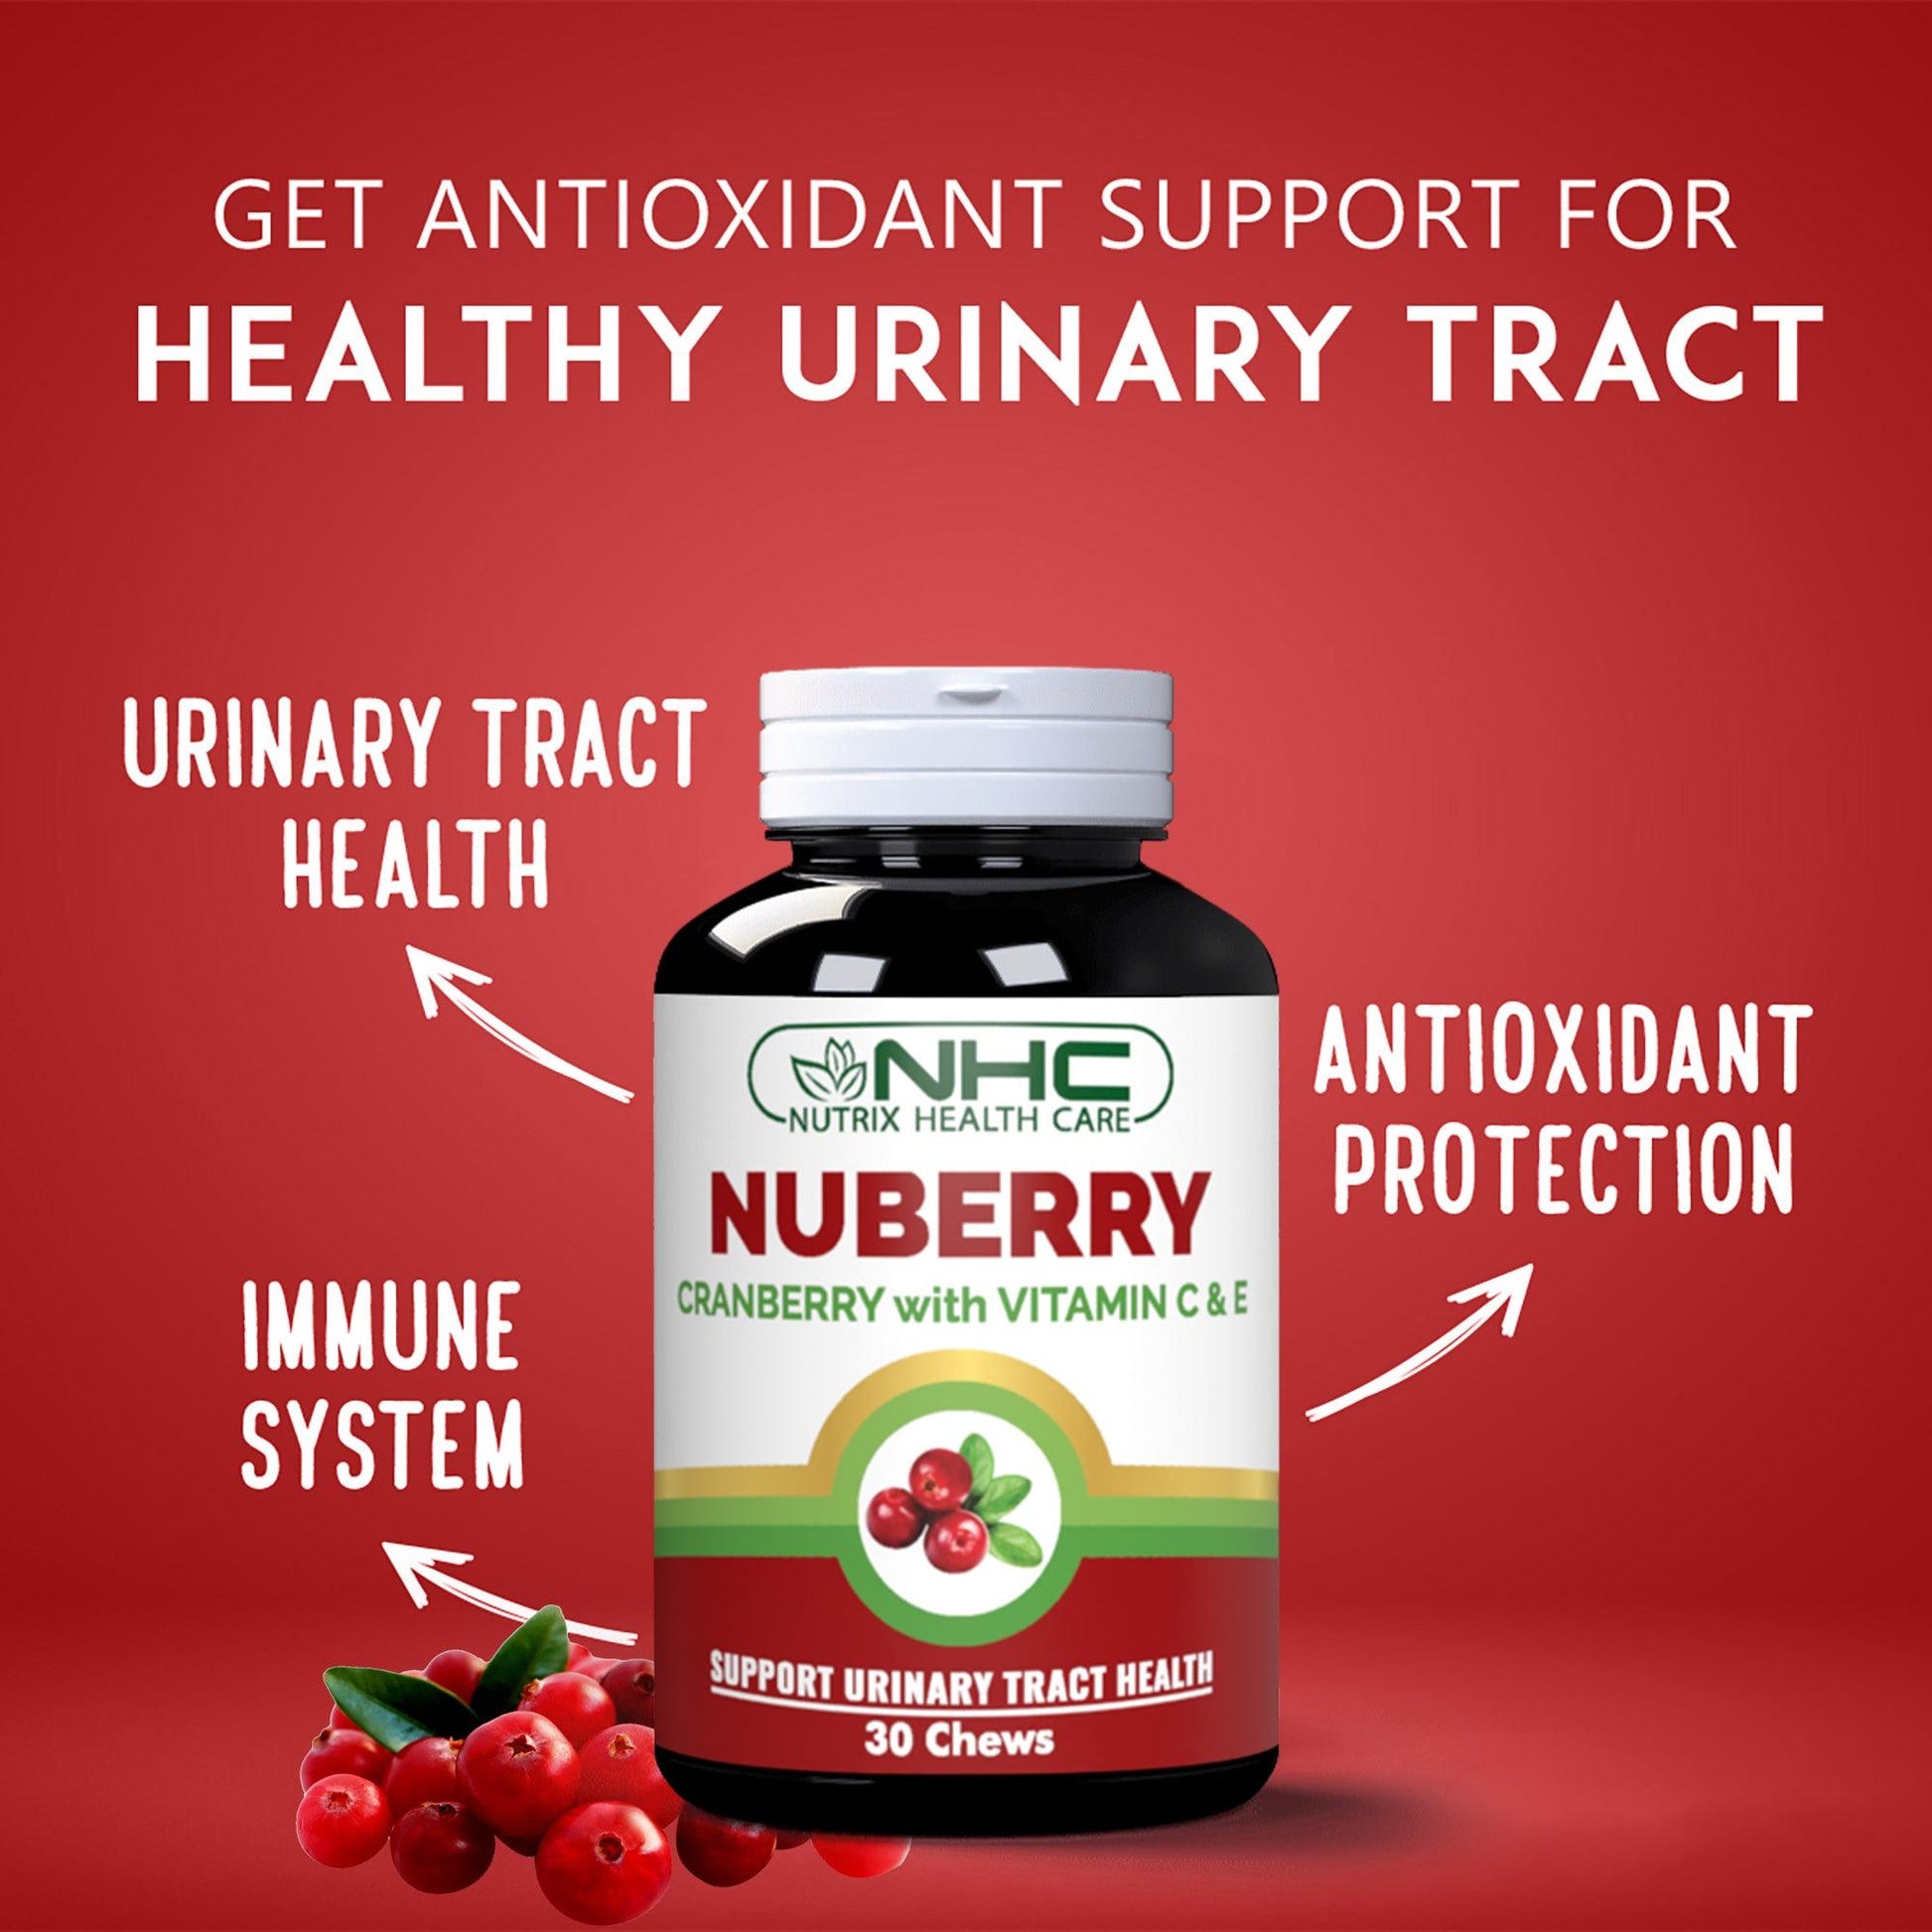 NUBERRY SUPPORTS URINARY TRACT HEALTH - Healthifyme.pk